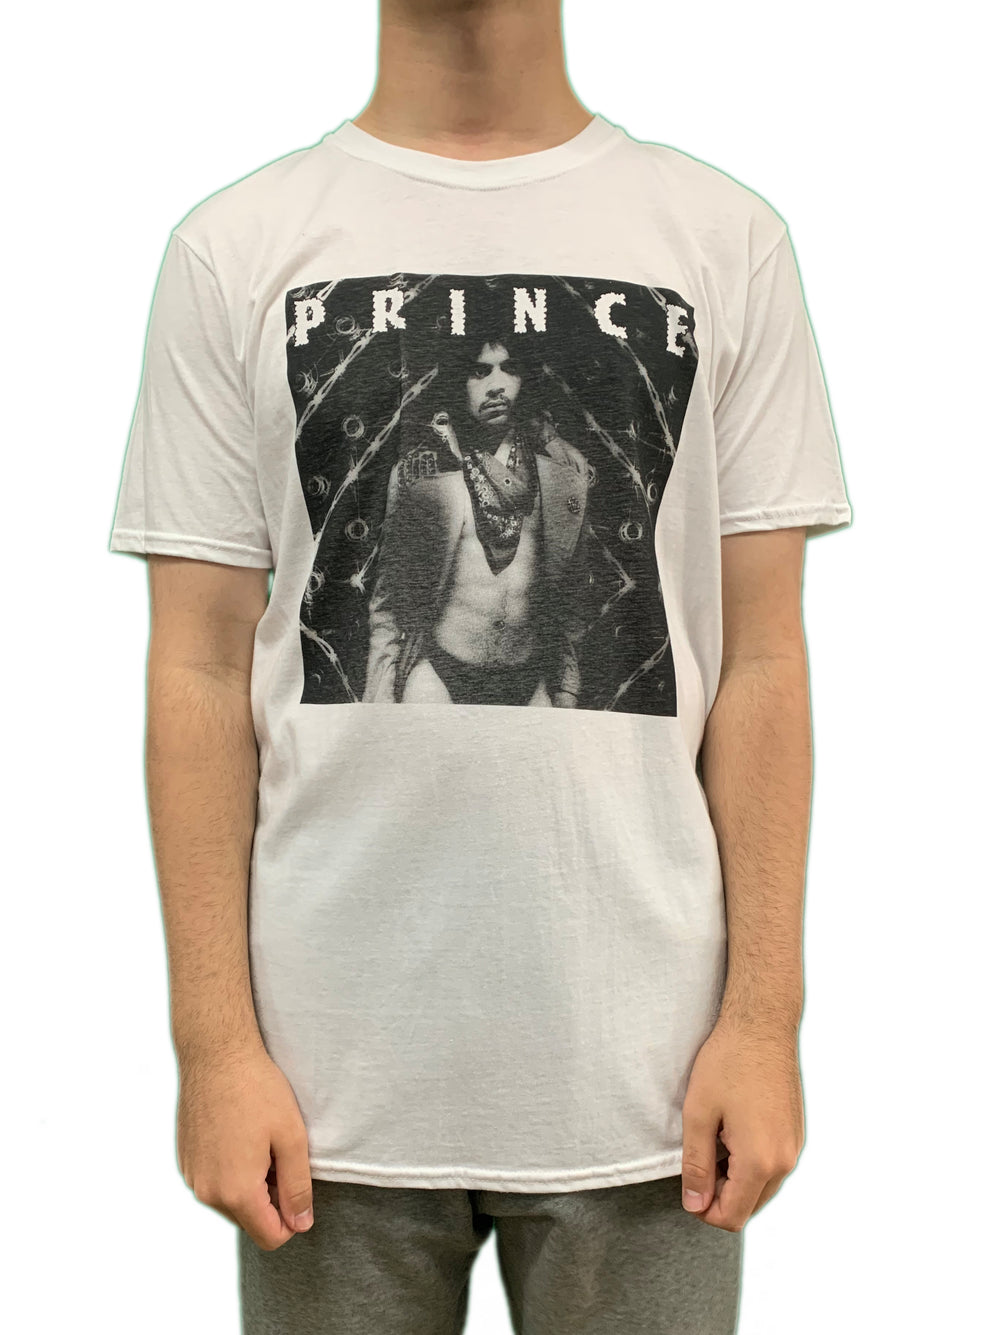 Prince – Dirty Mind Album Front Cover Unisex Official T-Shirt NEW